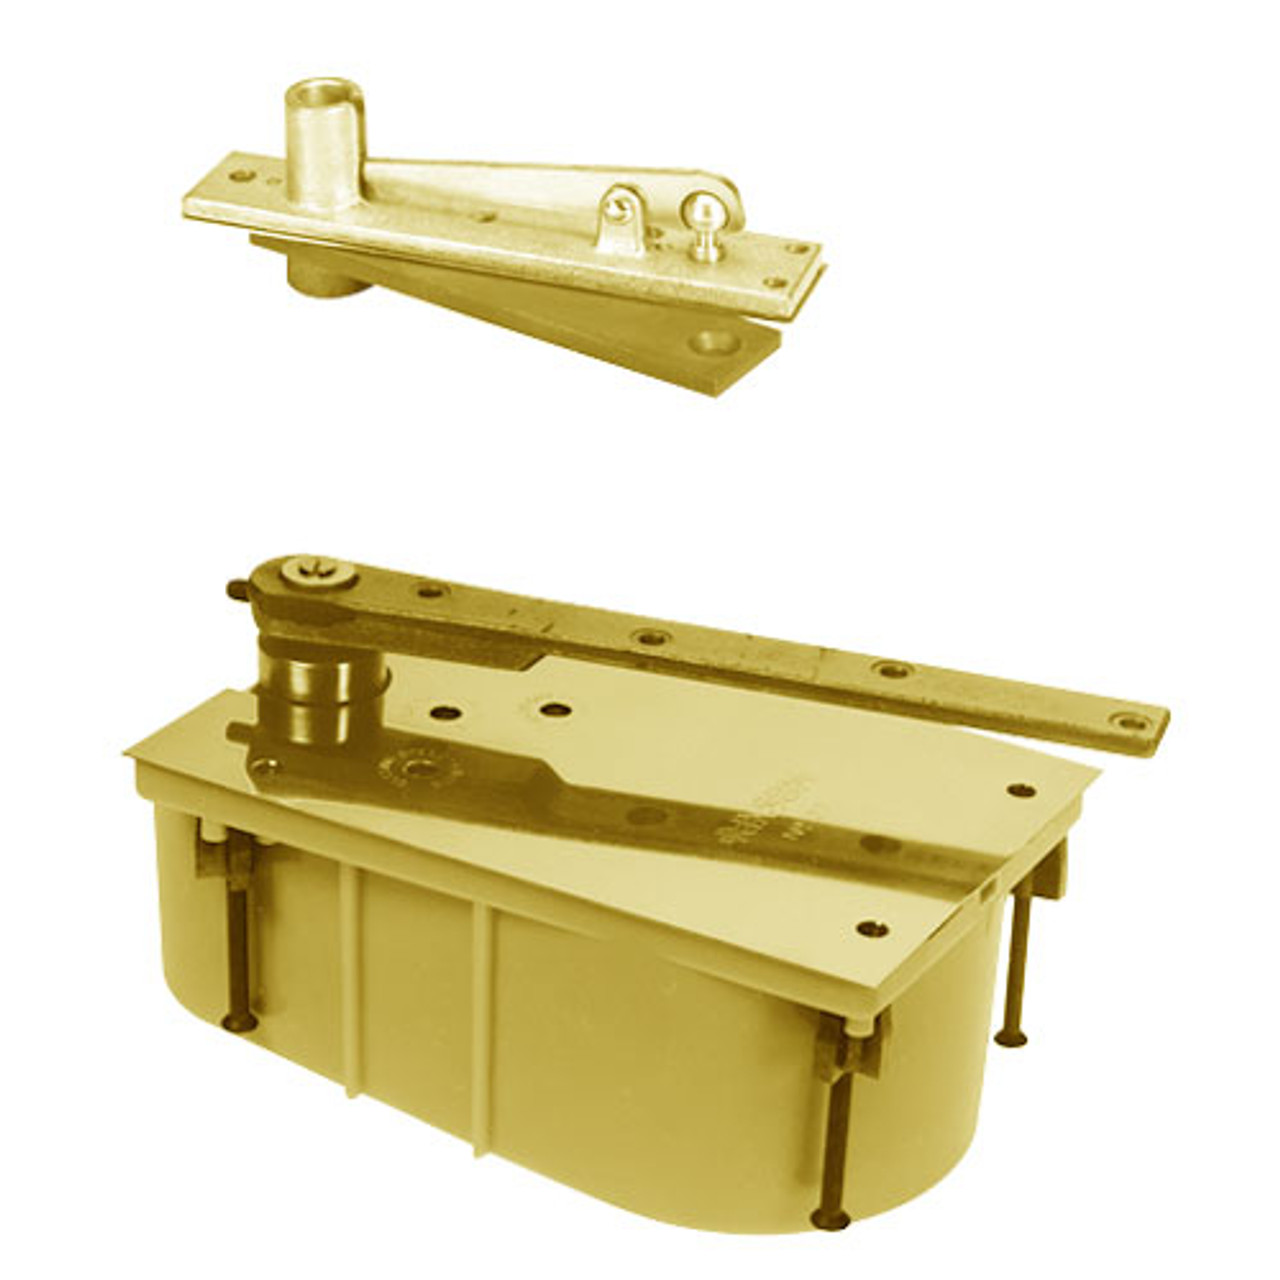 28-85S-554-CWF-RH-605 Rixson 28 Series Heavy Duty Single Acting Center Hung Floor Closer with Concealed Arm in Bright Brass Finish